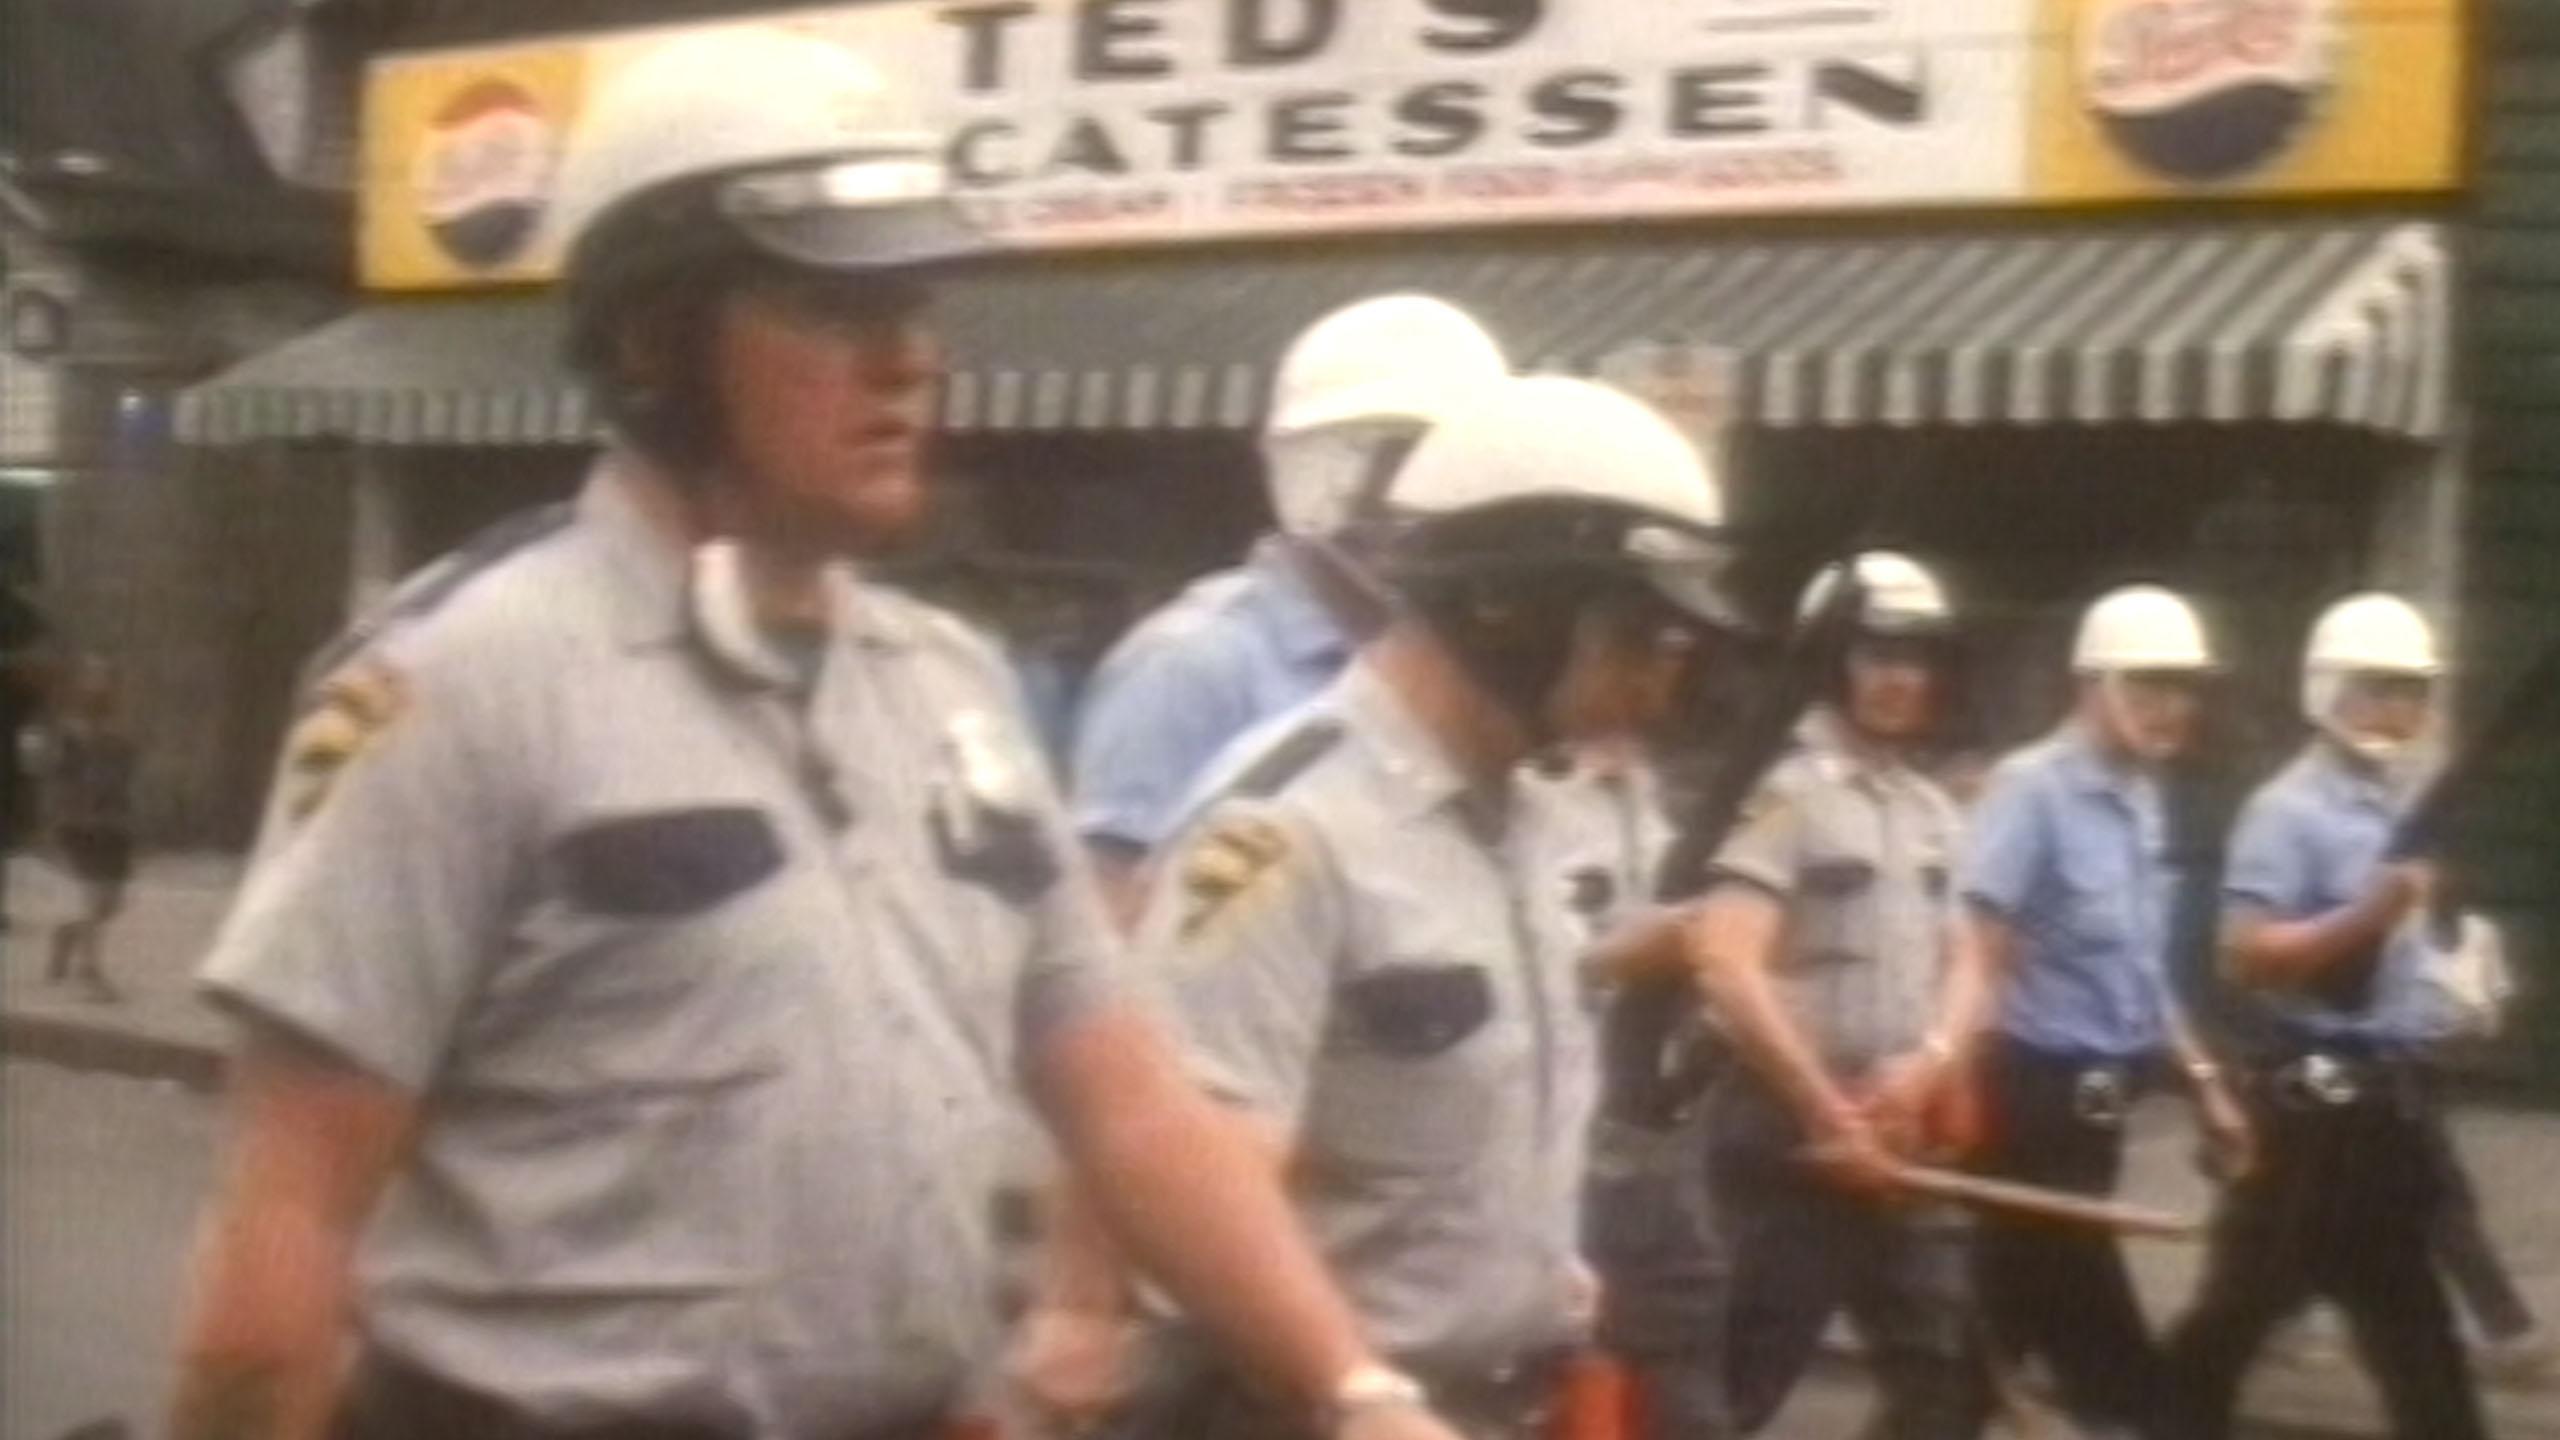 an archival photo of a group of policemen wearing helmets, walking in front of a deli